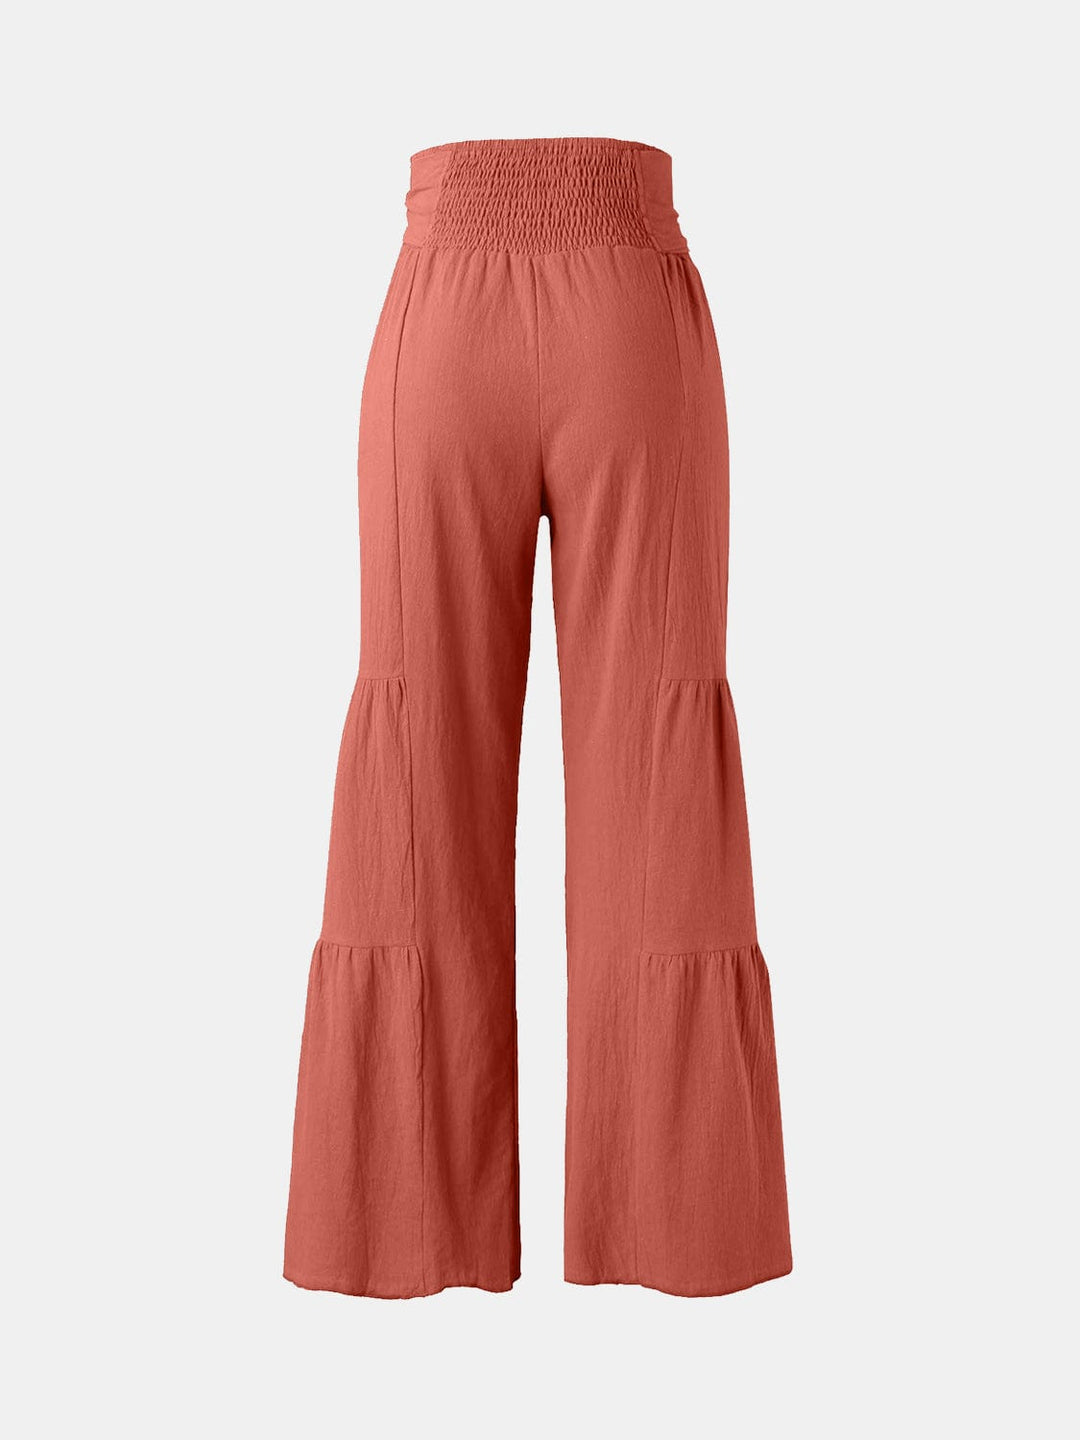 The802Gypsy Bottoms/Pants & Culotte Orange-Red / S GYPSY-Tied Ruched Wide Leg Pants